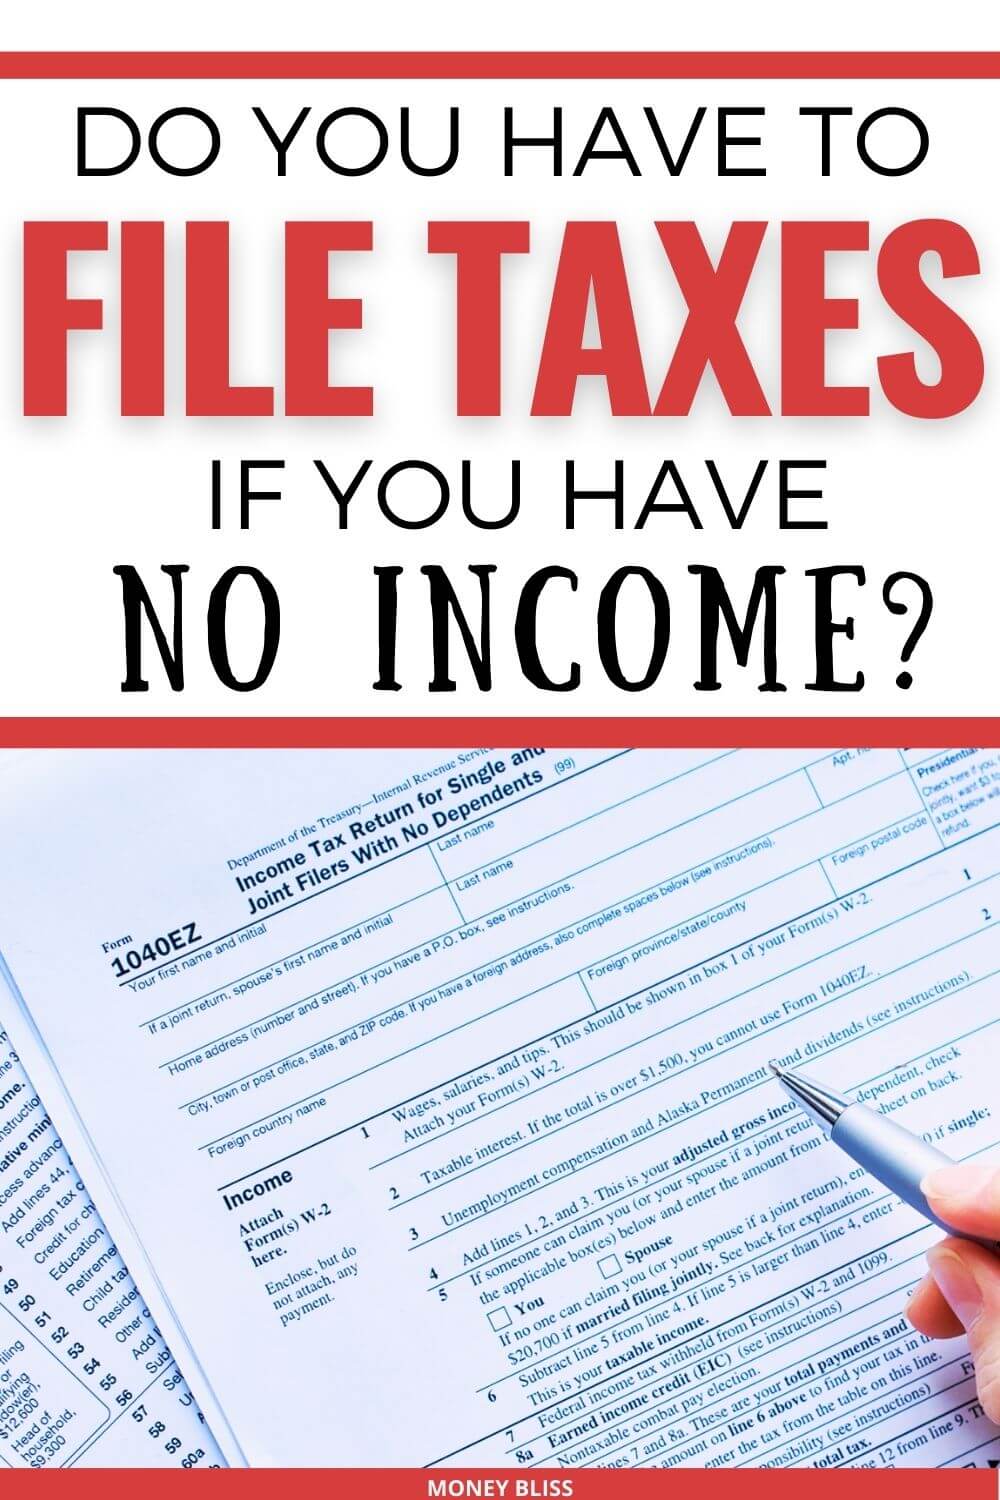 Do you have to file taxes if you have no income? This guide will help you determine if you are eligible for a tax refund, find out what deductions and credits you may be able to claim, and provide instructions on how to file your taxes with no income.